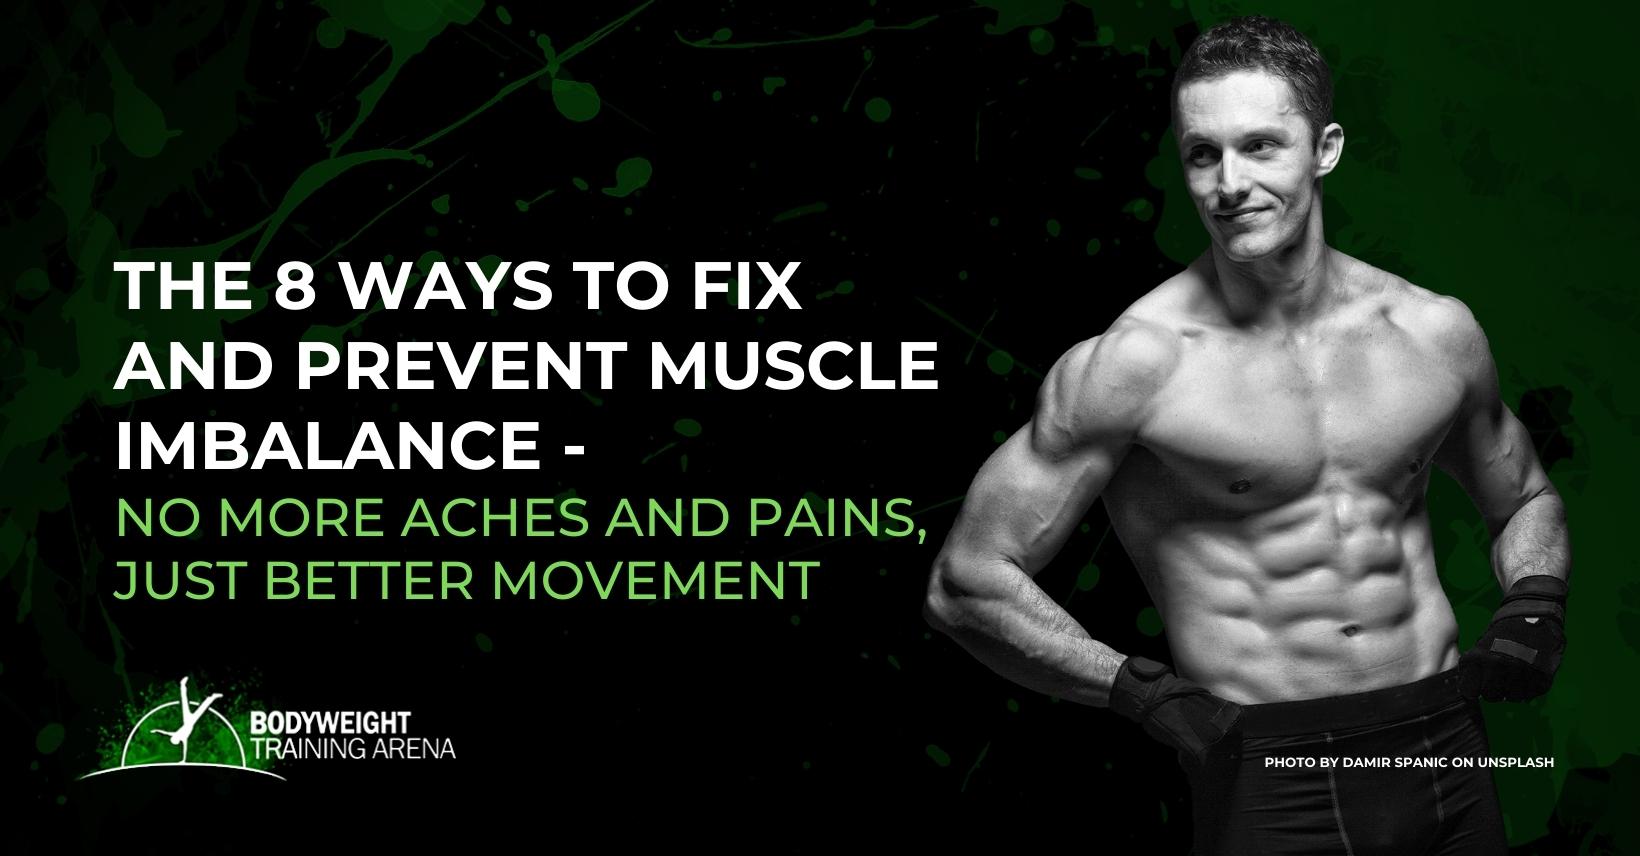 The 8 ways to fix and prevent muscle imbalance – No more aches and pains, just better movement